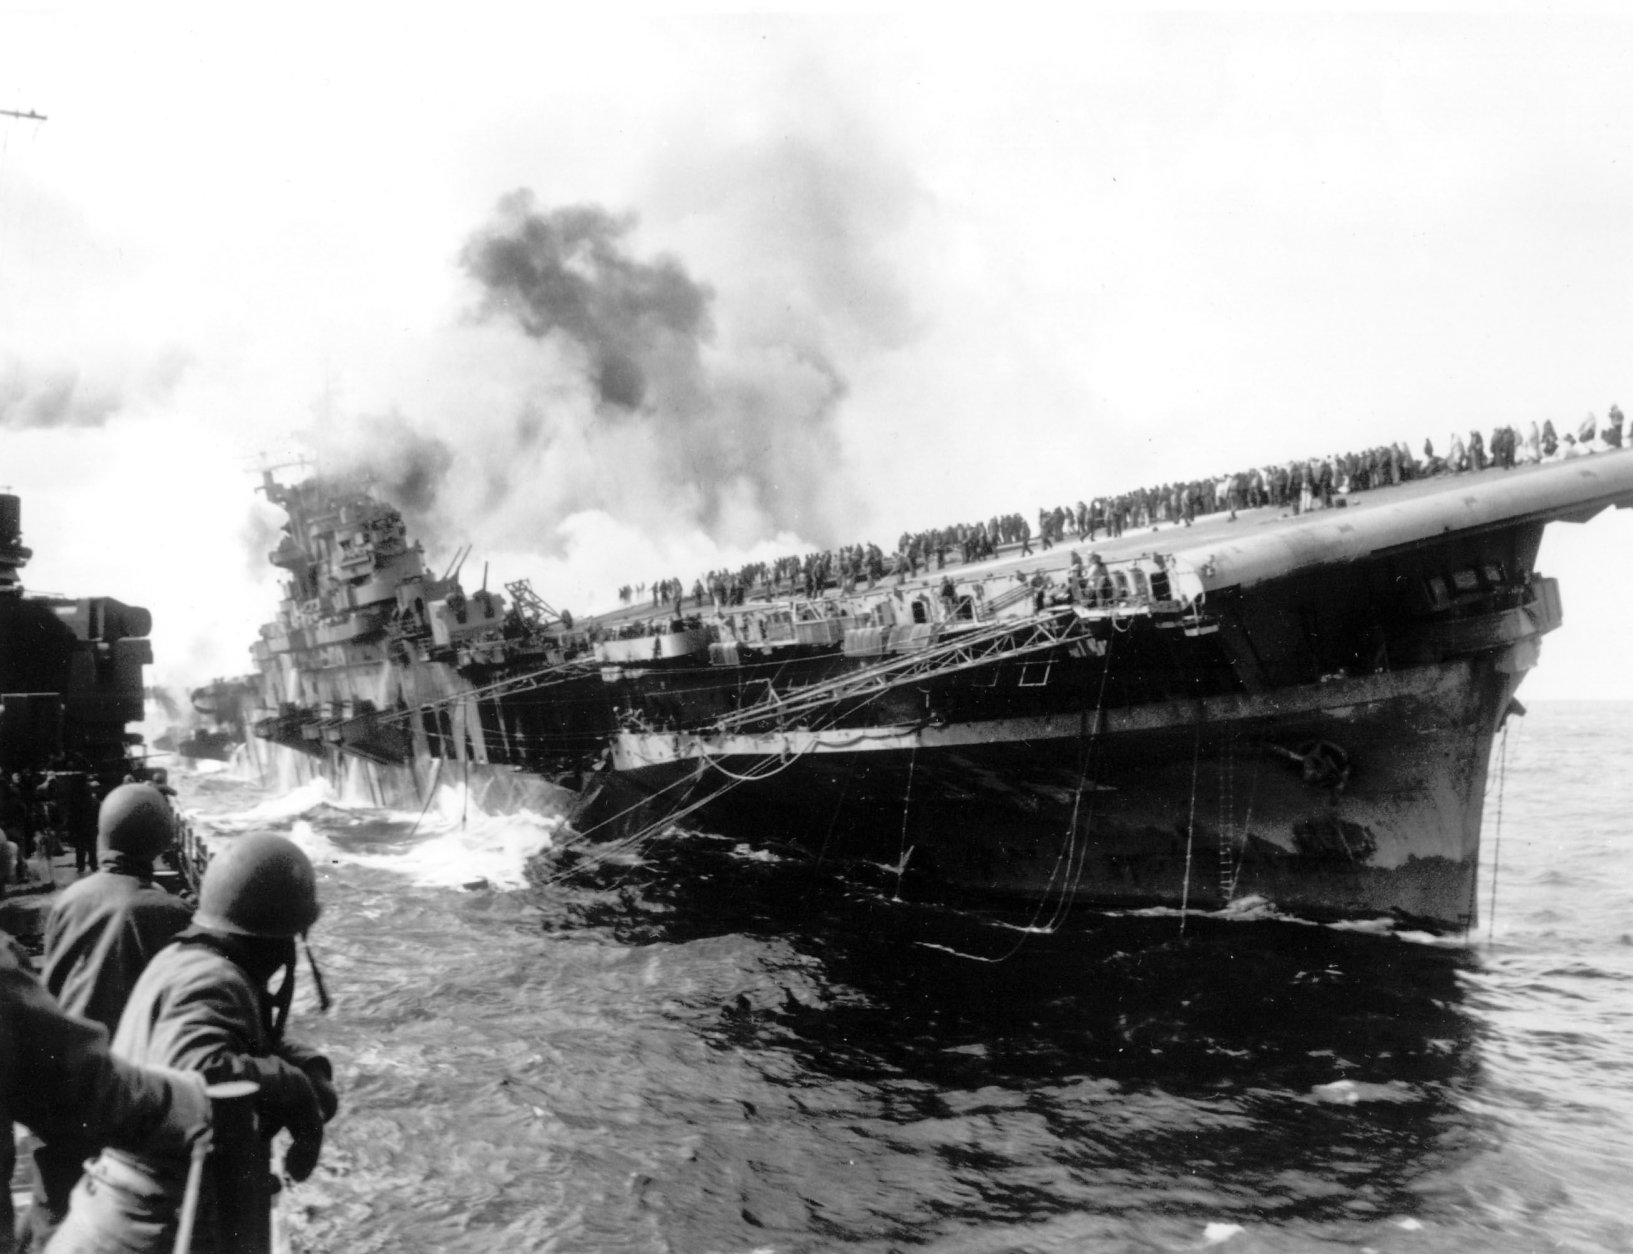 In this image provided by the U.S. Navy, the USS Santa Fe lies alongside the heavily listing USS Franklin to provide assistance after the aircraft carrier had been hit and set afire by a single Japanese dive bomber, during the Okinawa invasion, on March 19, 1945, off the coast of Honshu, Japan.  (AP Photo/U.S. Navy)